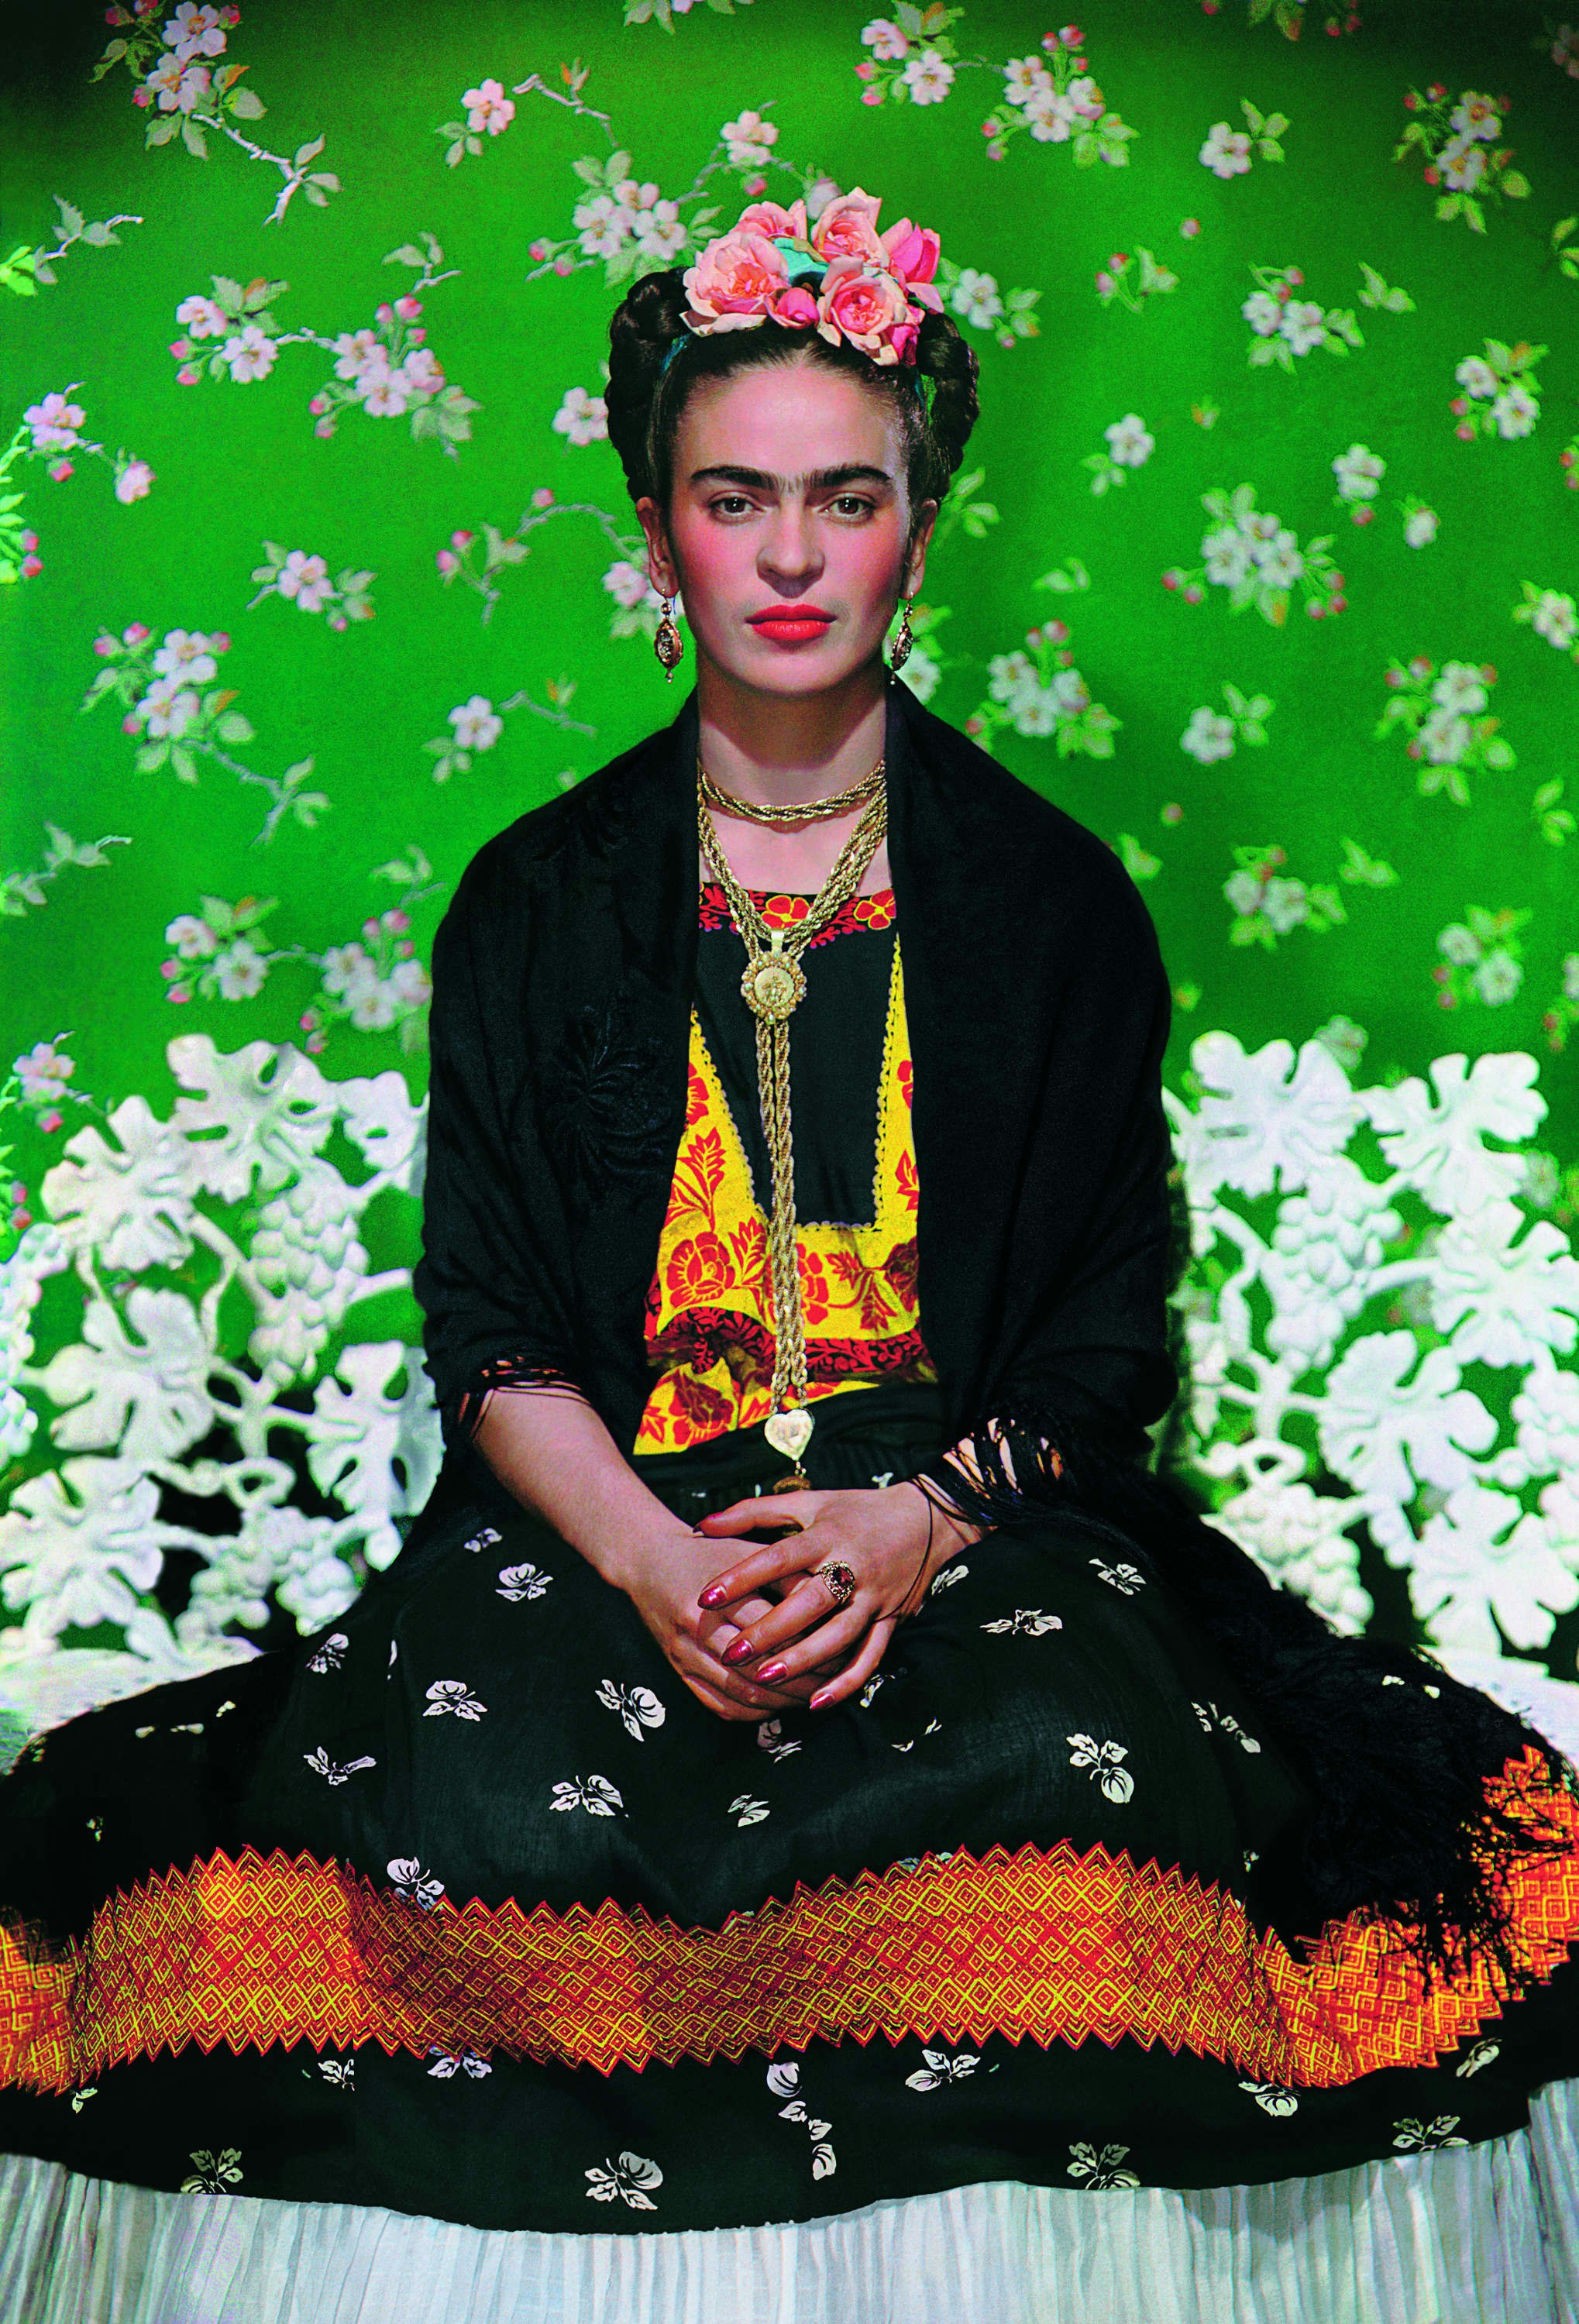 Travel News - Frida Kahlo on a bench, carbon print, 1938, photo by Nickolas Muray © The Jacques and Natasha Gelman Collection of 20th Century Mexican Art and The Verge,Nickolas Muray Photo Archives